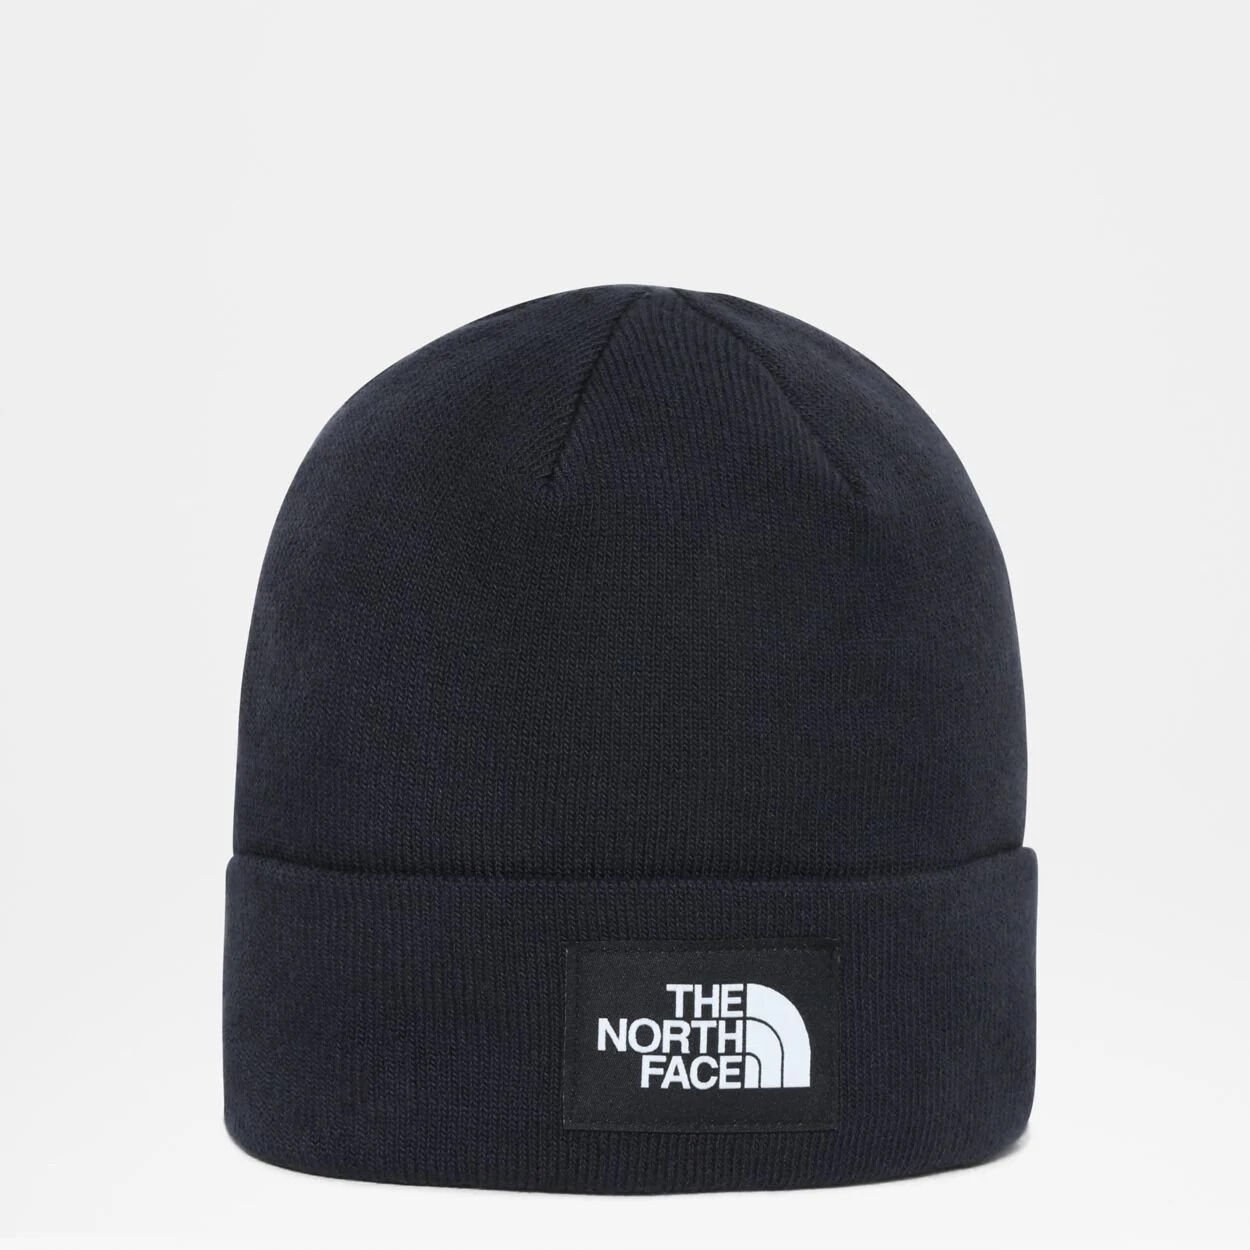 The North Face Dock Worker Recycled Beanie Unisex Bere